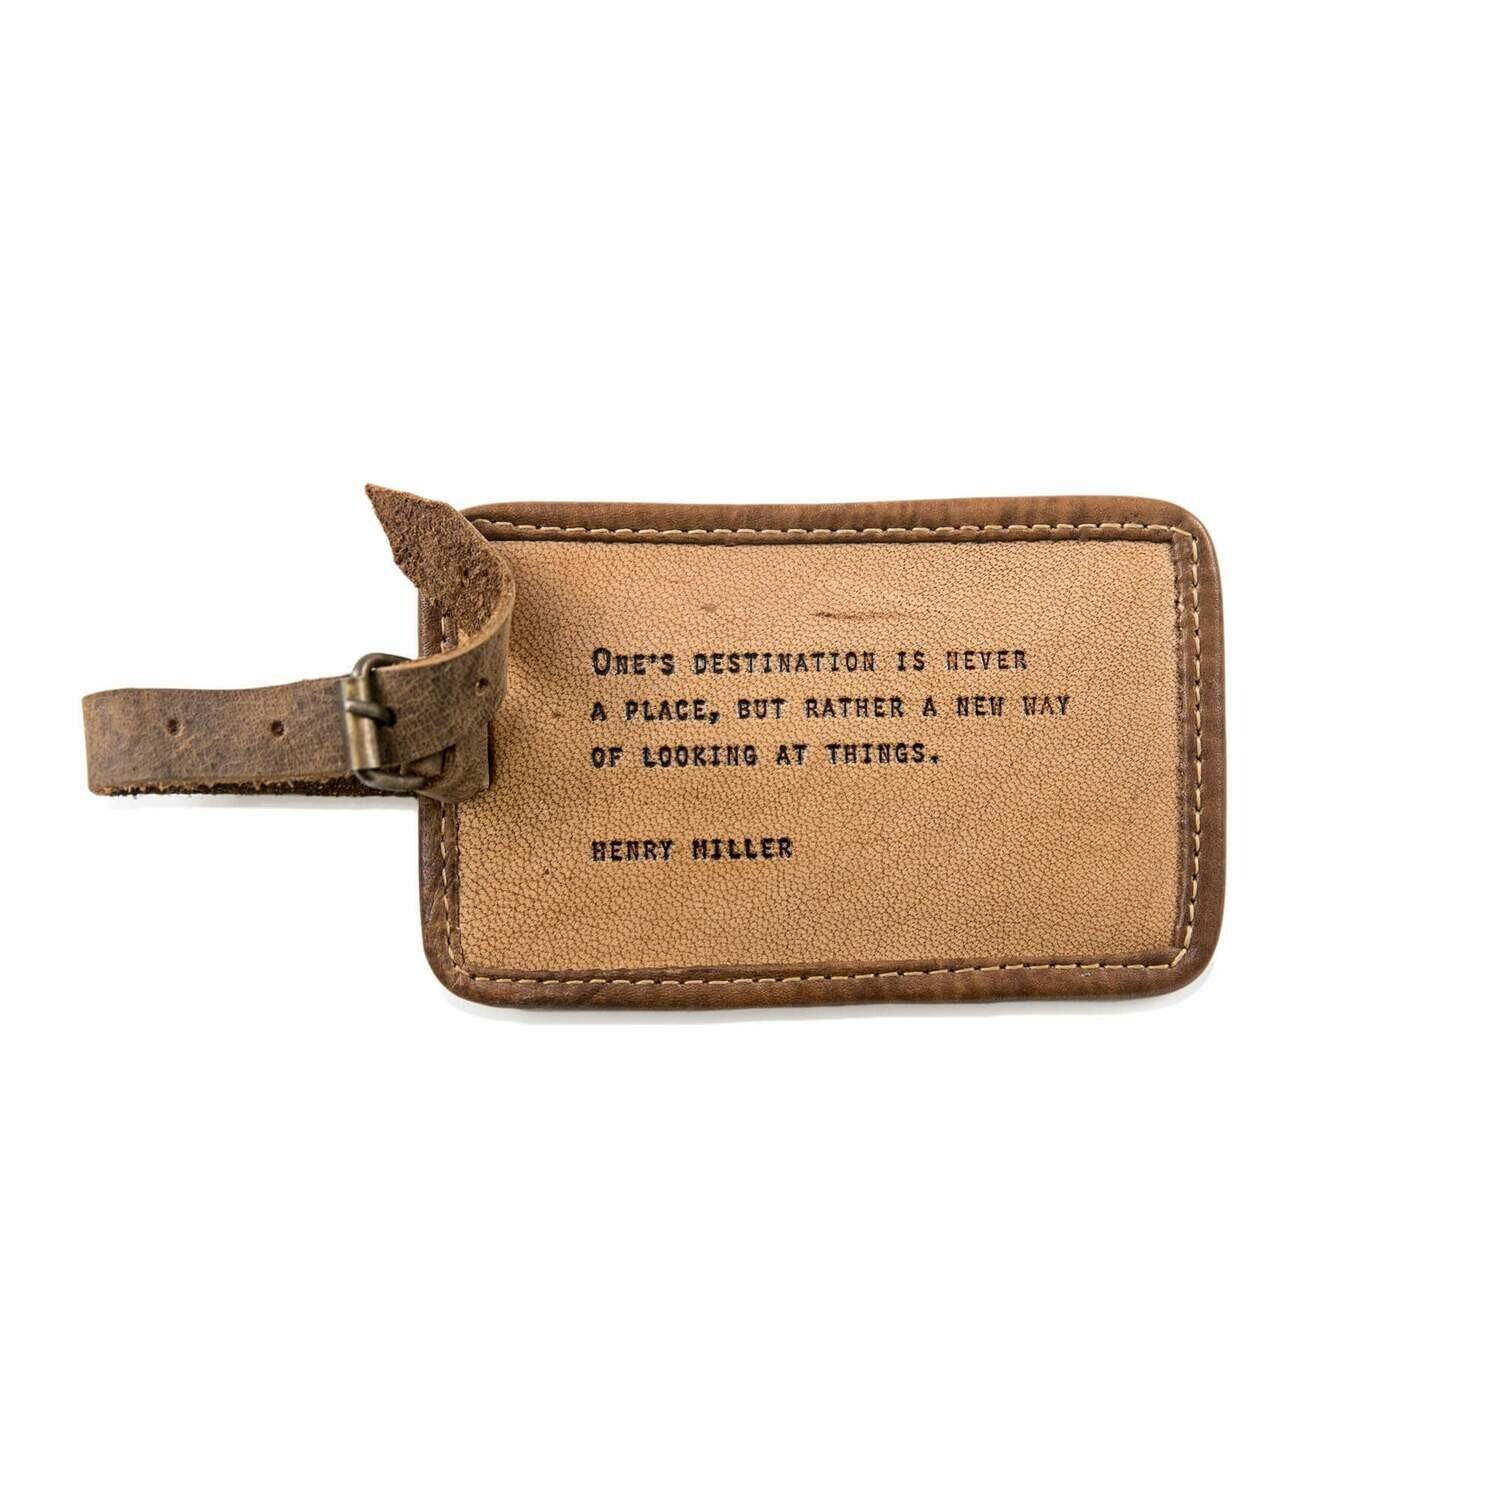 Henry Miller Leather Luggage Tags /LJ130